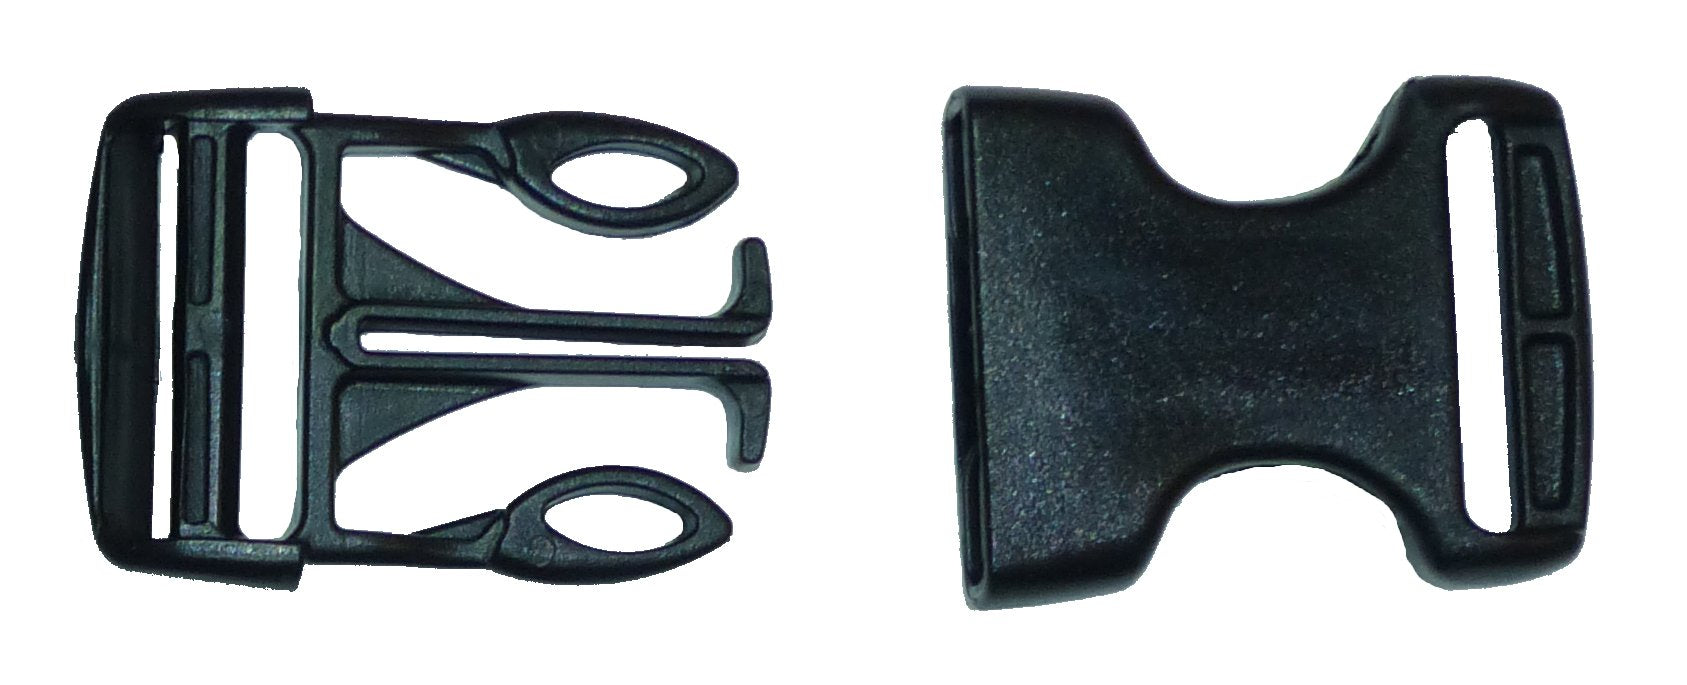 Benristraps 20mm plastic quick release buckle separated into two parts